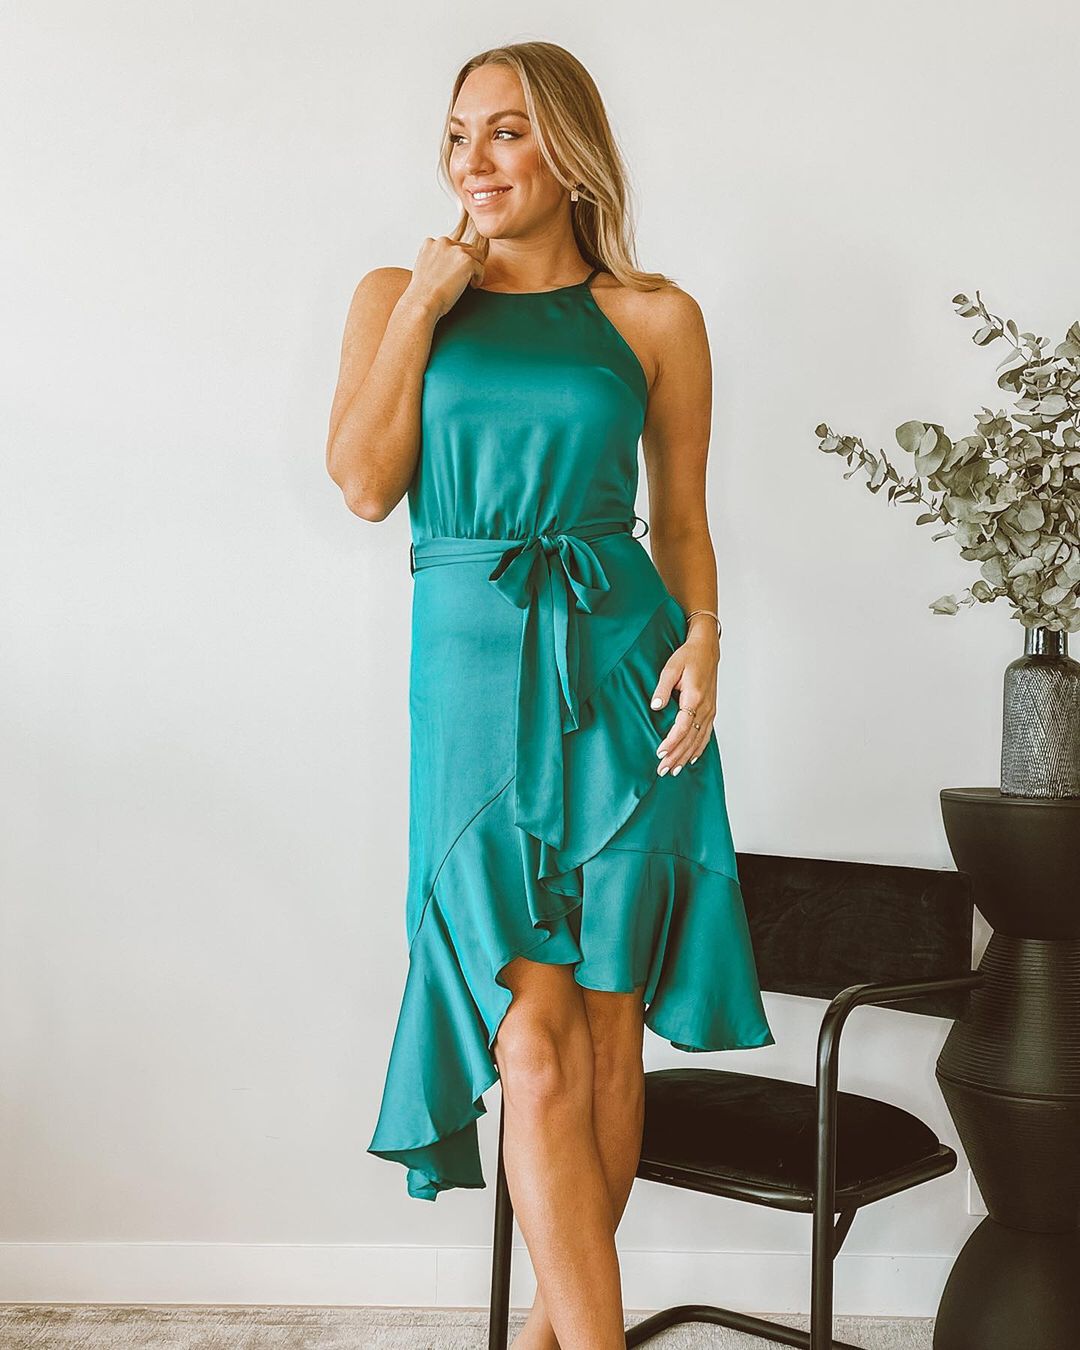 
Zip up back and button at neck
Size up if bottom heavy
Danika is wearing a size 14
 - Zara Midi Dress - Ebby and I